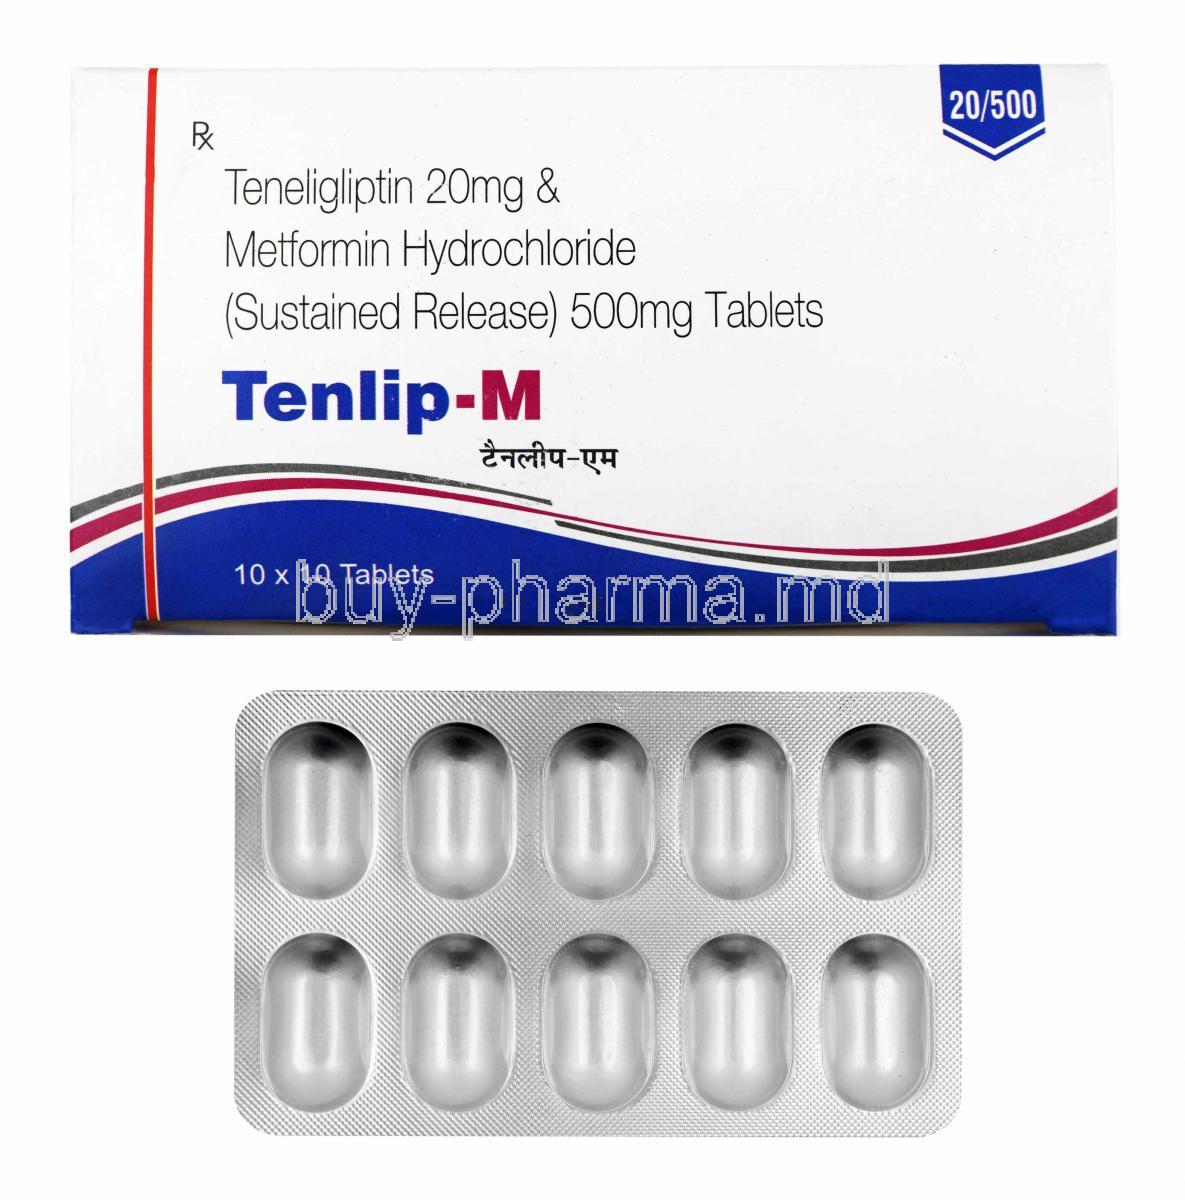 Tenlip-M, Metformin and Teneligliptin box and tablets